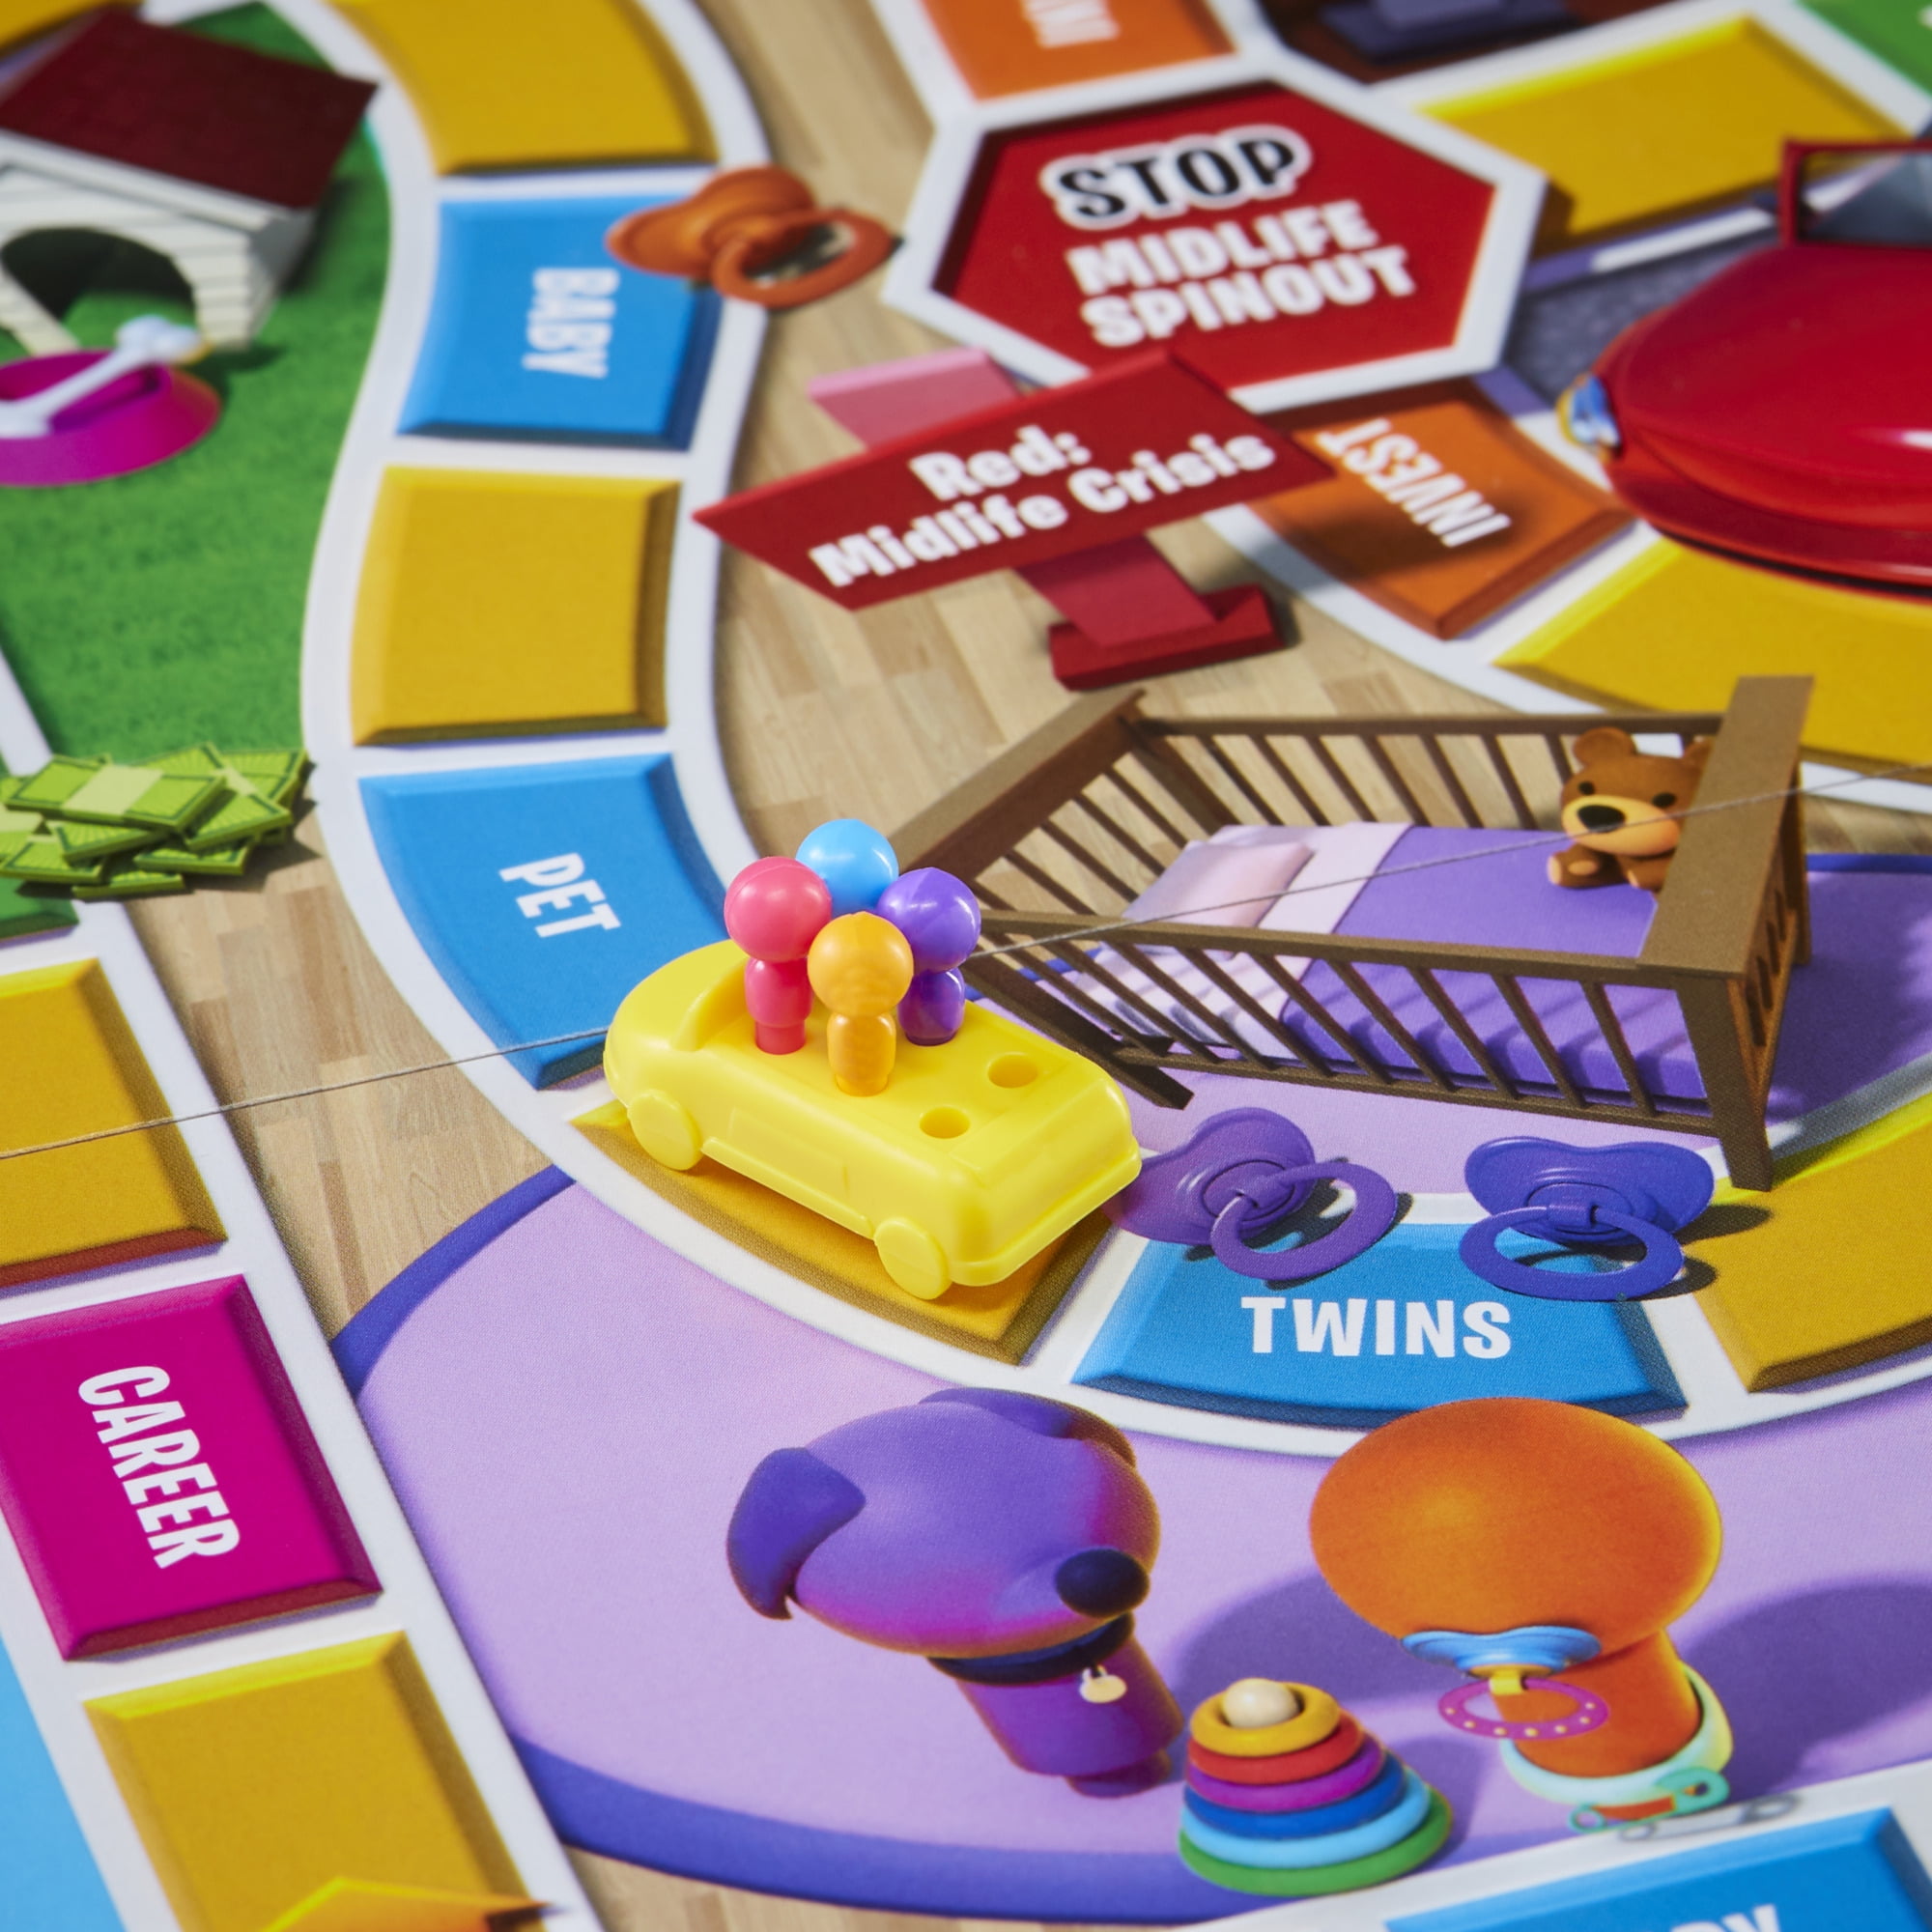 Hasbro - The Game of Life: Inside Out Edition